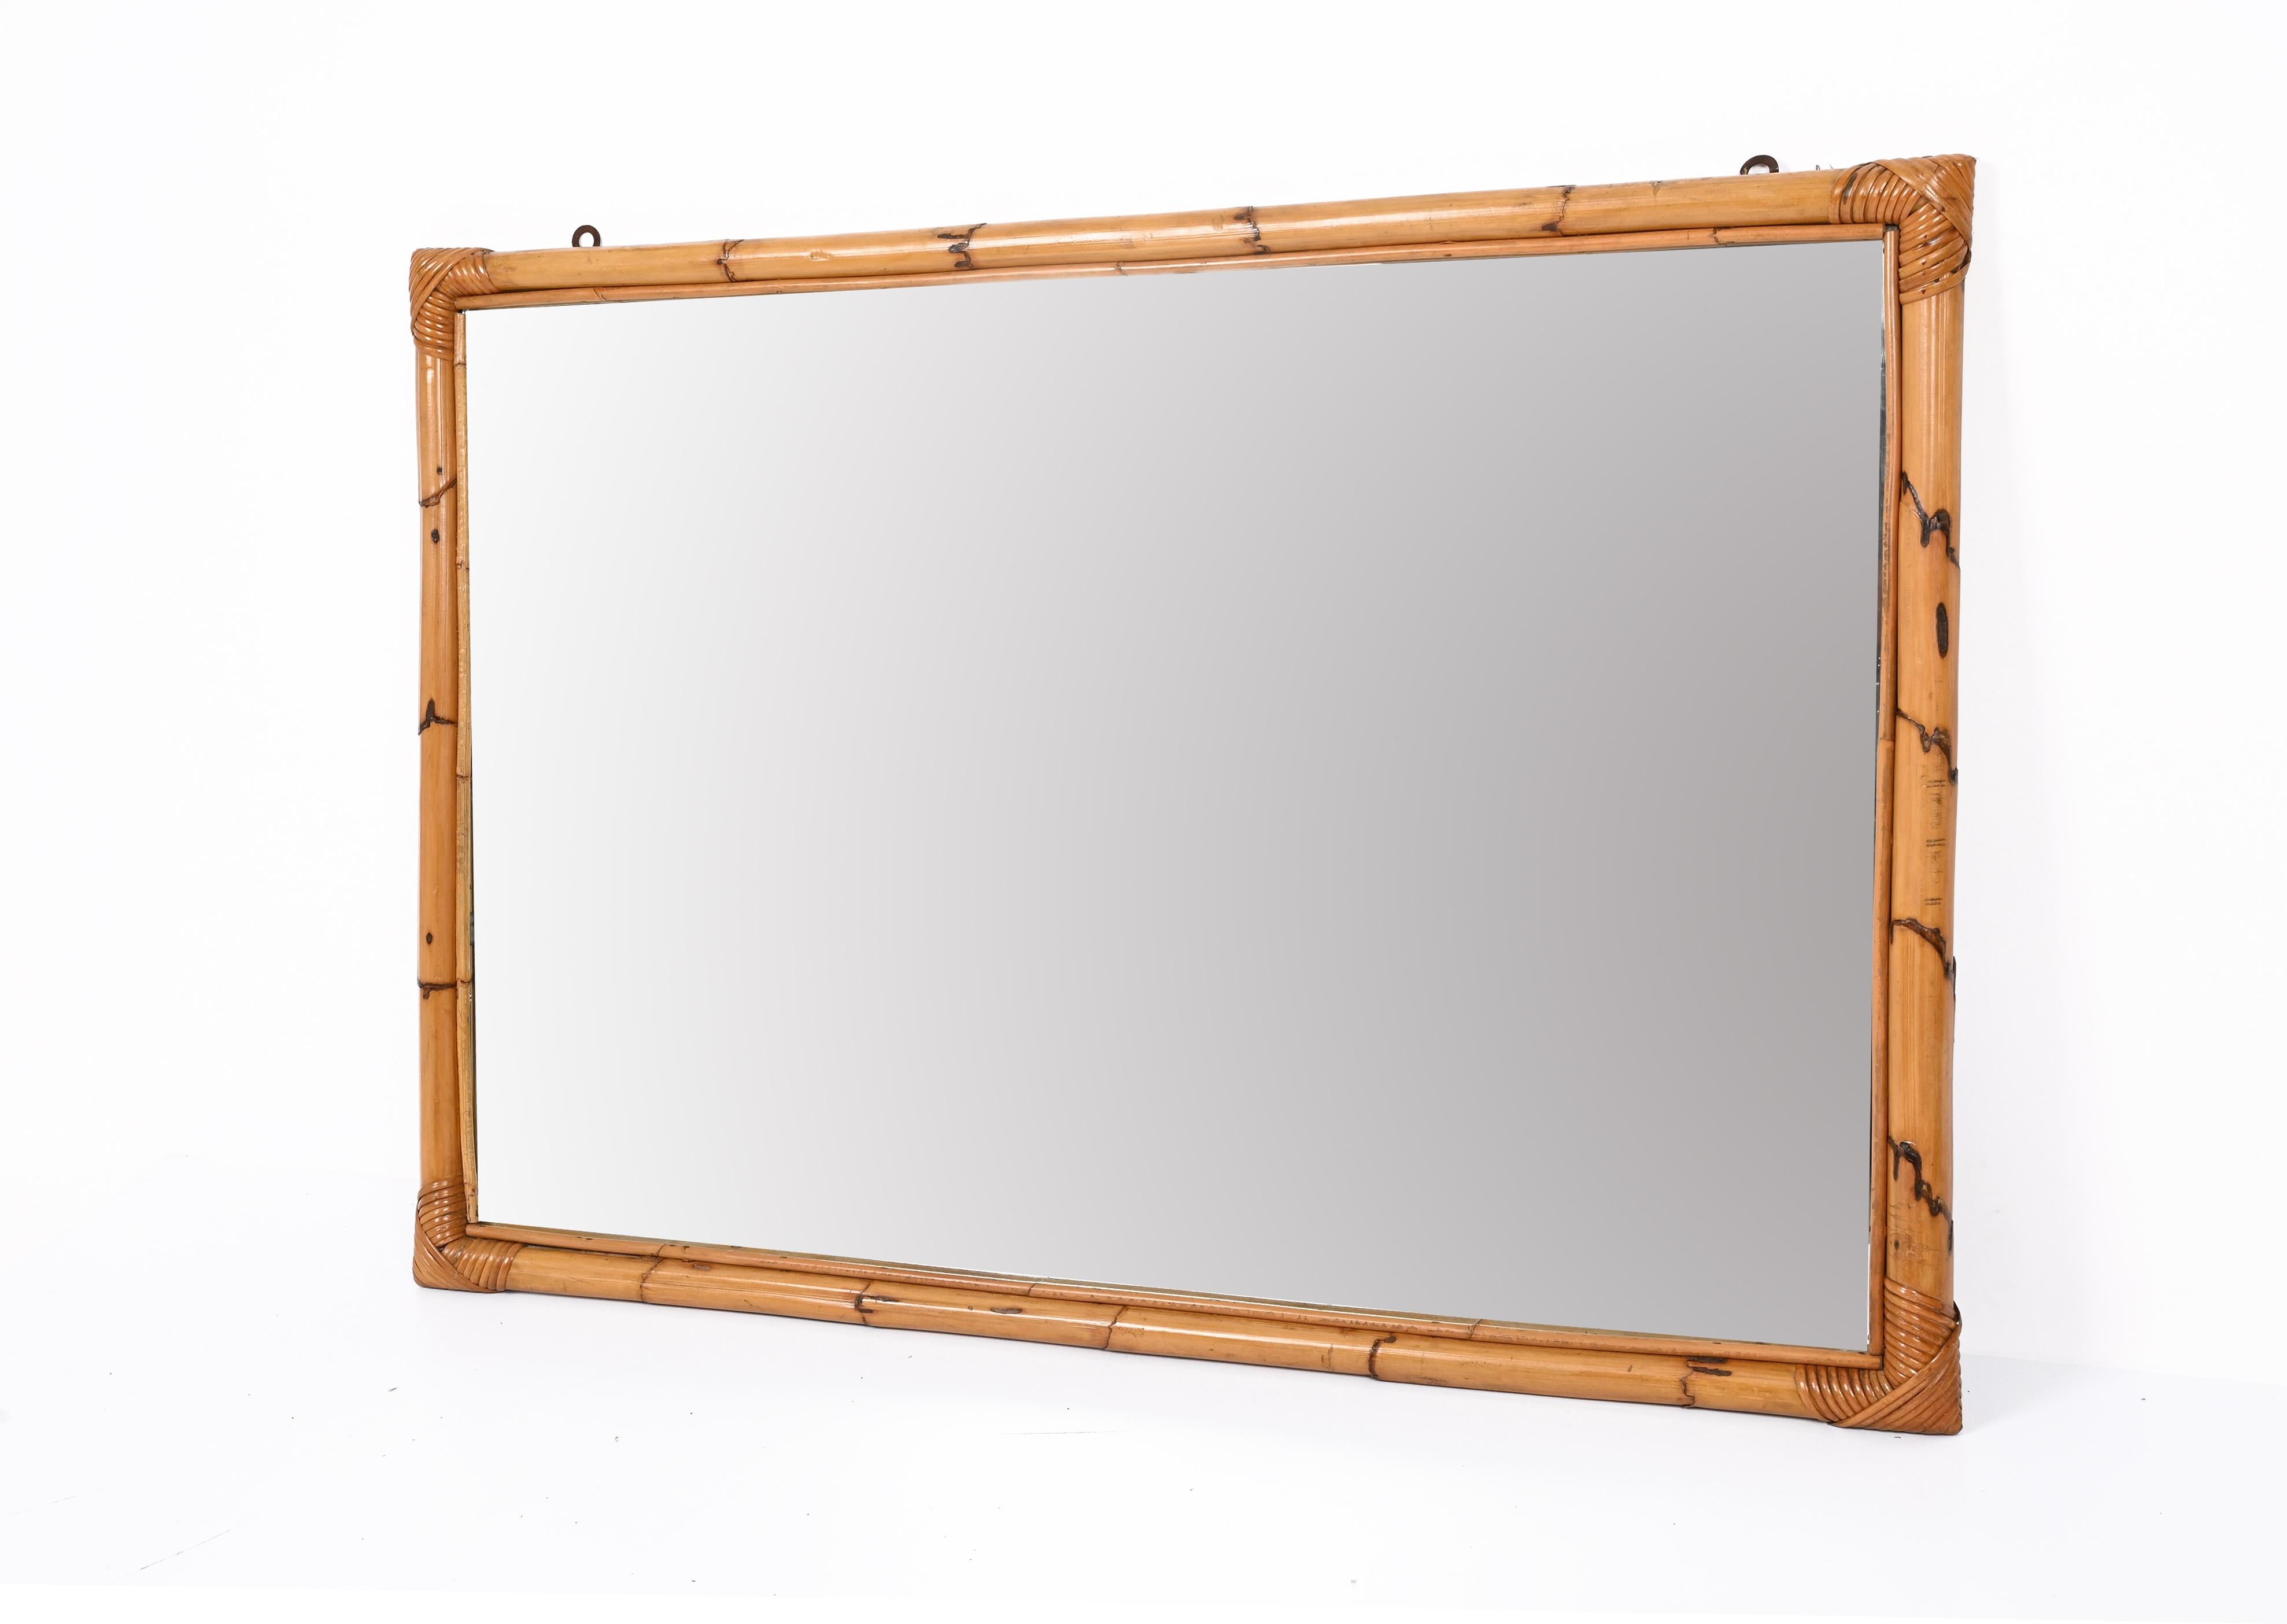 Midcentury Large Rectangular Italian Mirror with Double Bamboo Cane Frame, 1970s For Sale 10